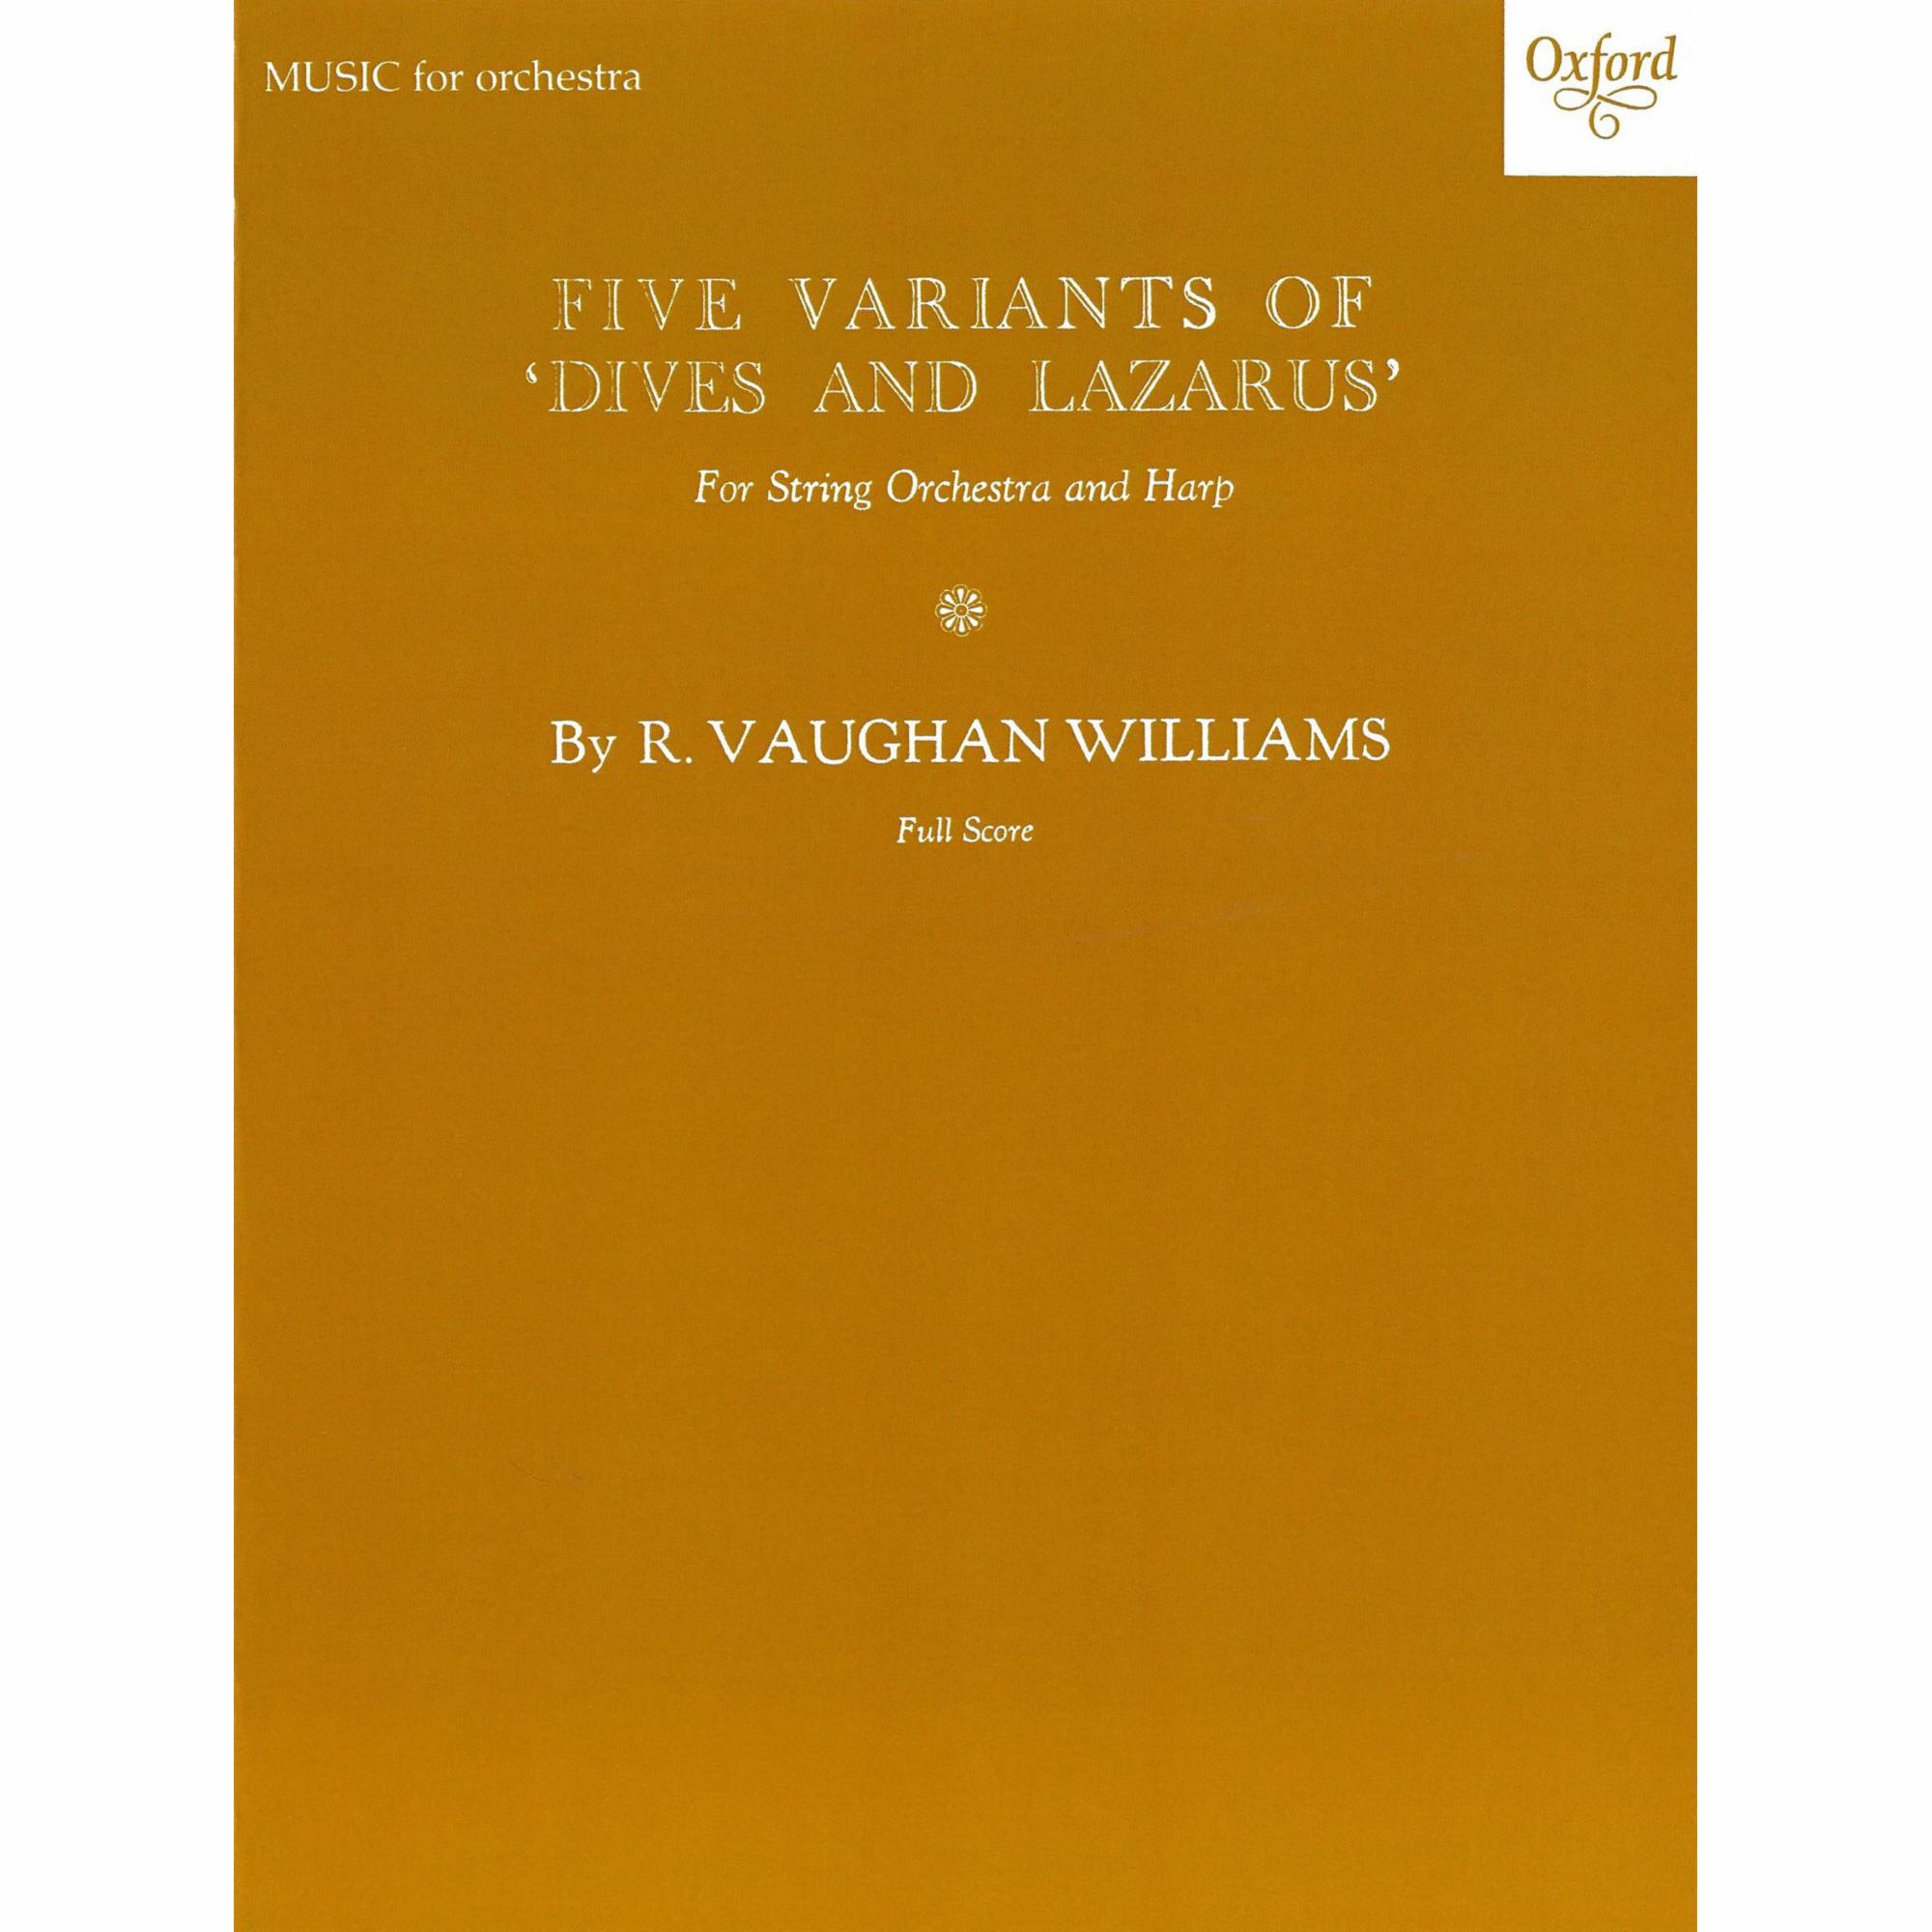 Vaughan Williams -- Five Variants on Dives and Lazarus for String Orchestra and Harp